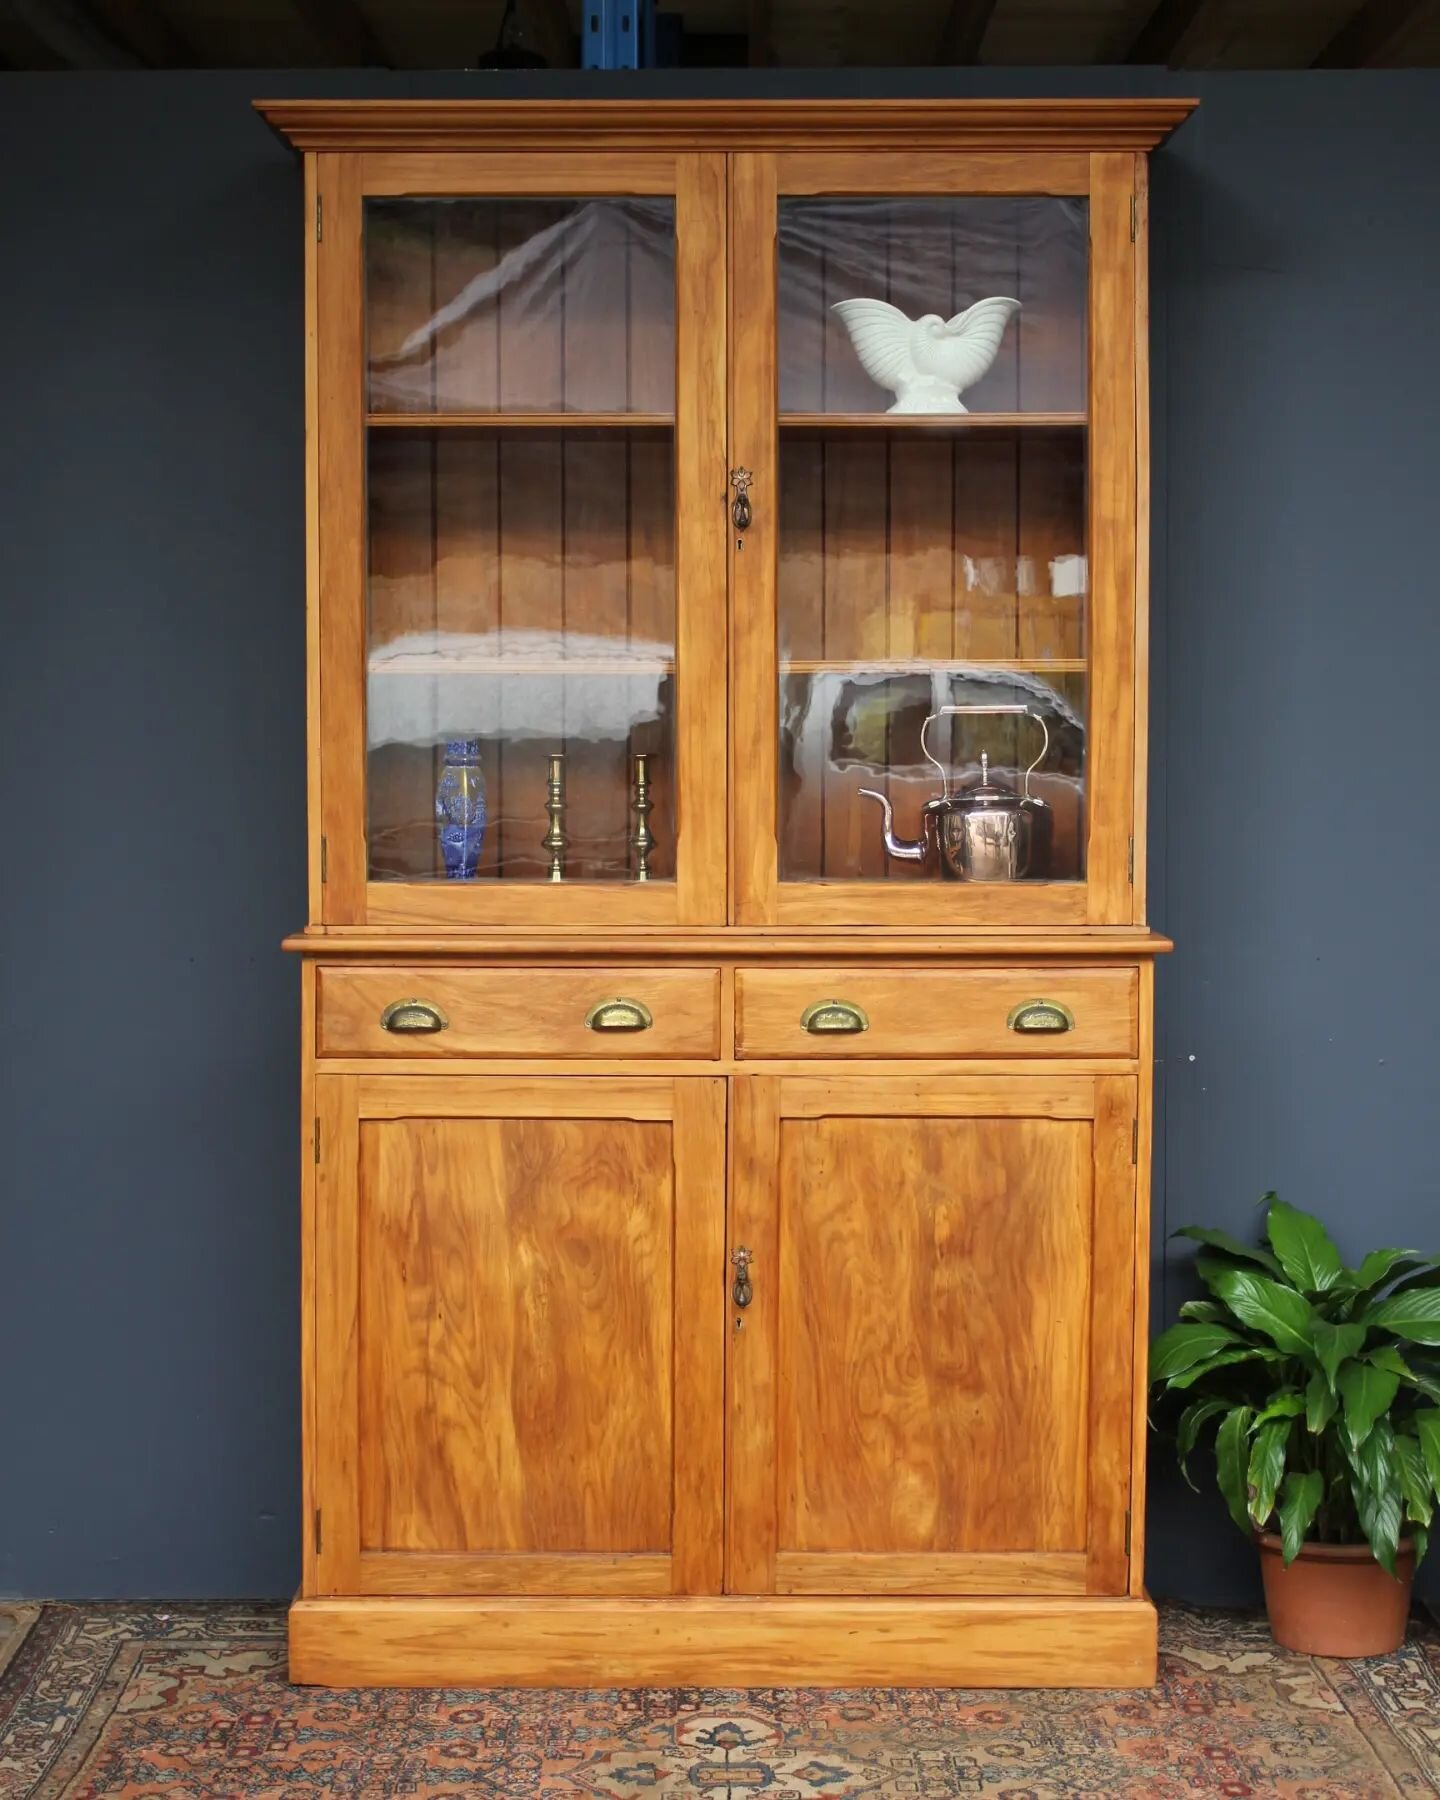 Antique Kitchen cabinet.&nbsp; Originally this piece came from New Zealand and it looks very much like Rimu timber, which is a native NZ tree.&nbsp;&nbsp;
Beautiful colour with lovely grain.&nbsp; Larger than normal, glazed upper section, the bottom 